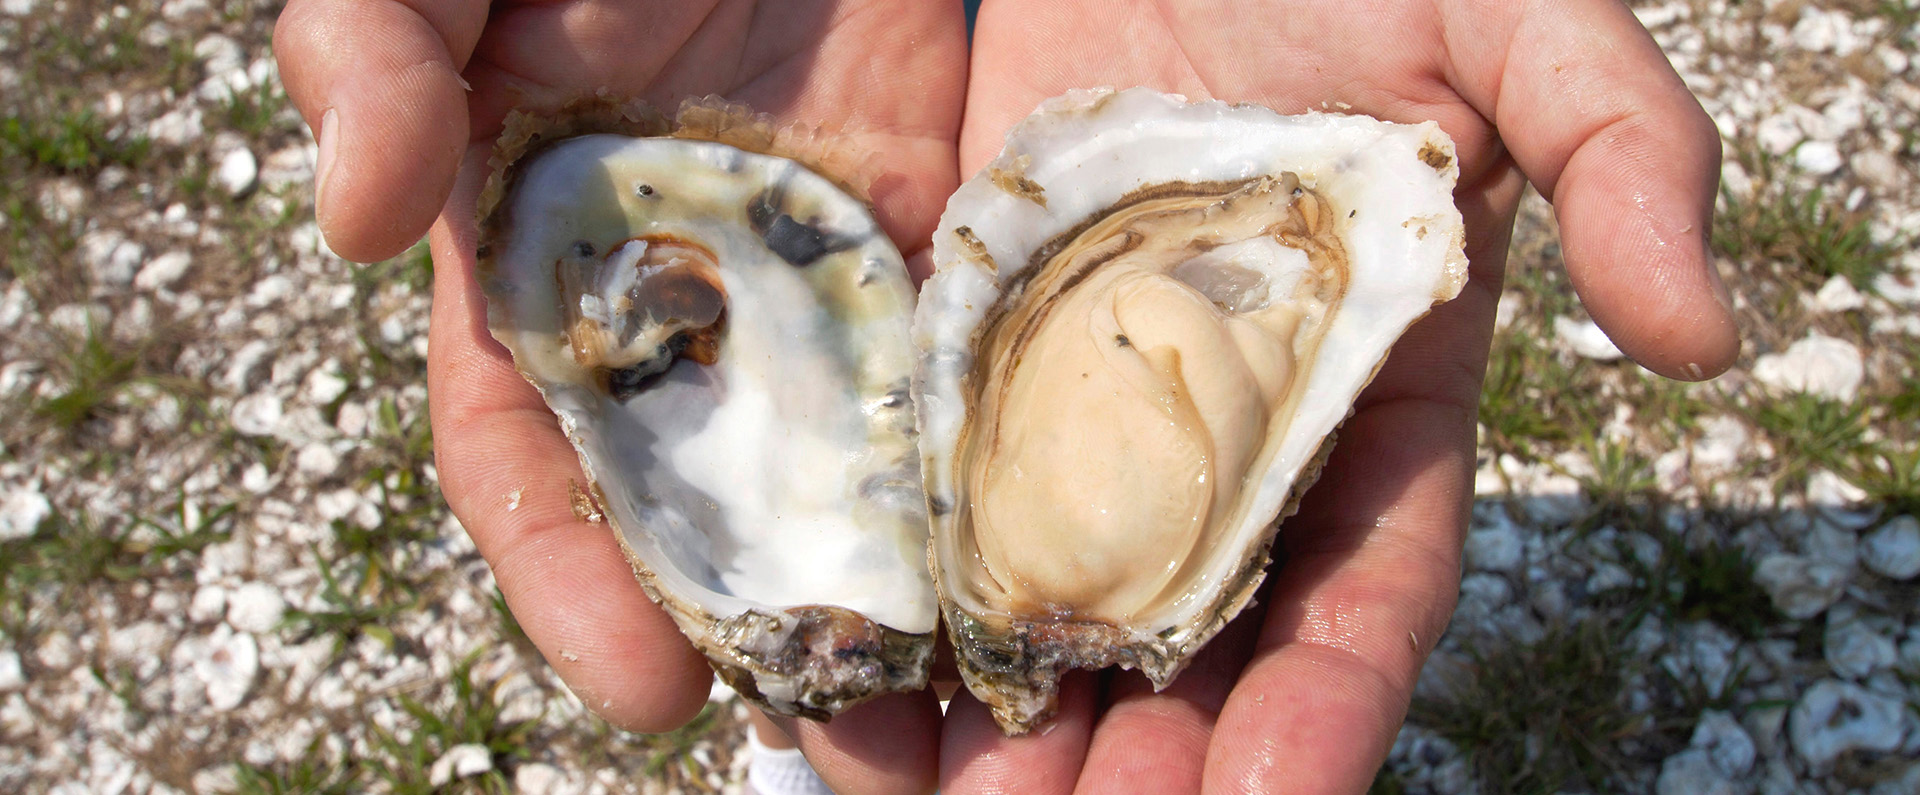 Two hands holding a freshly opened oyster 